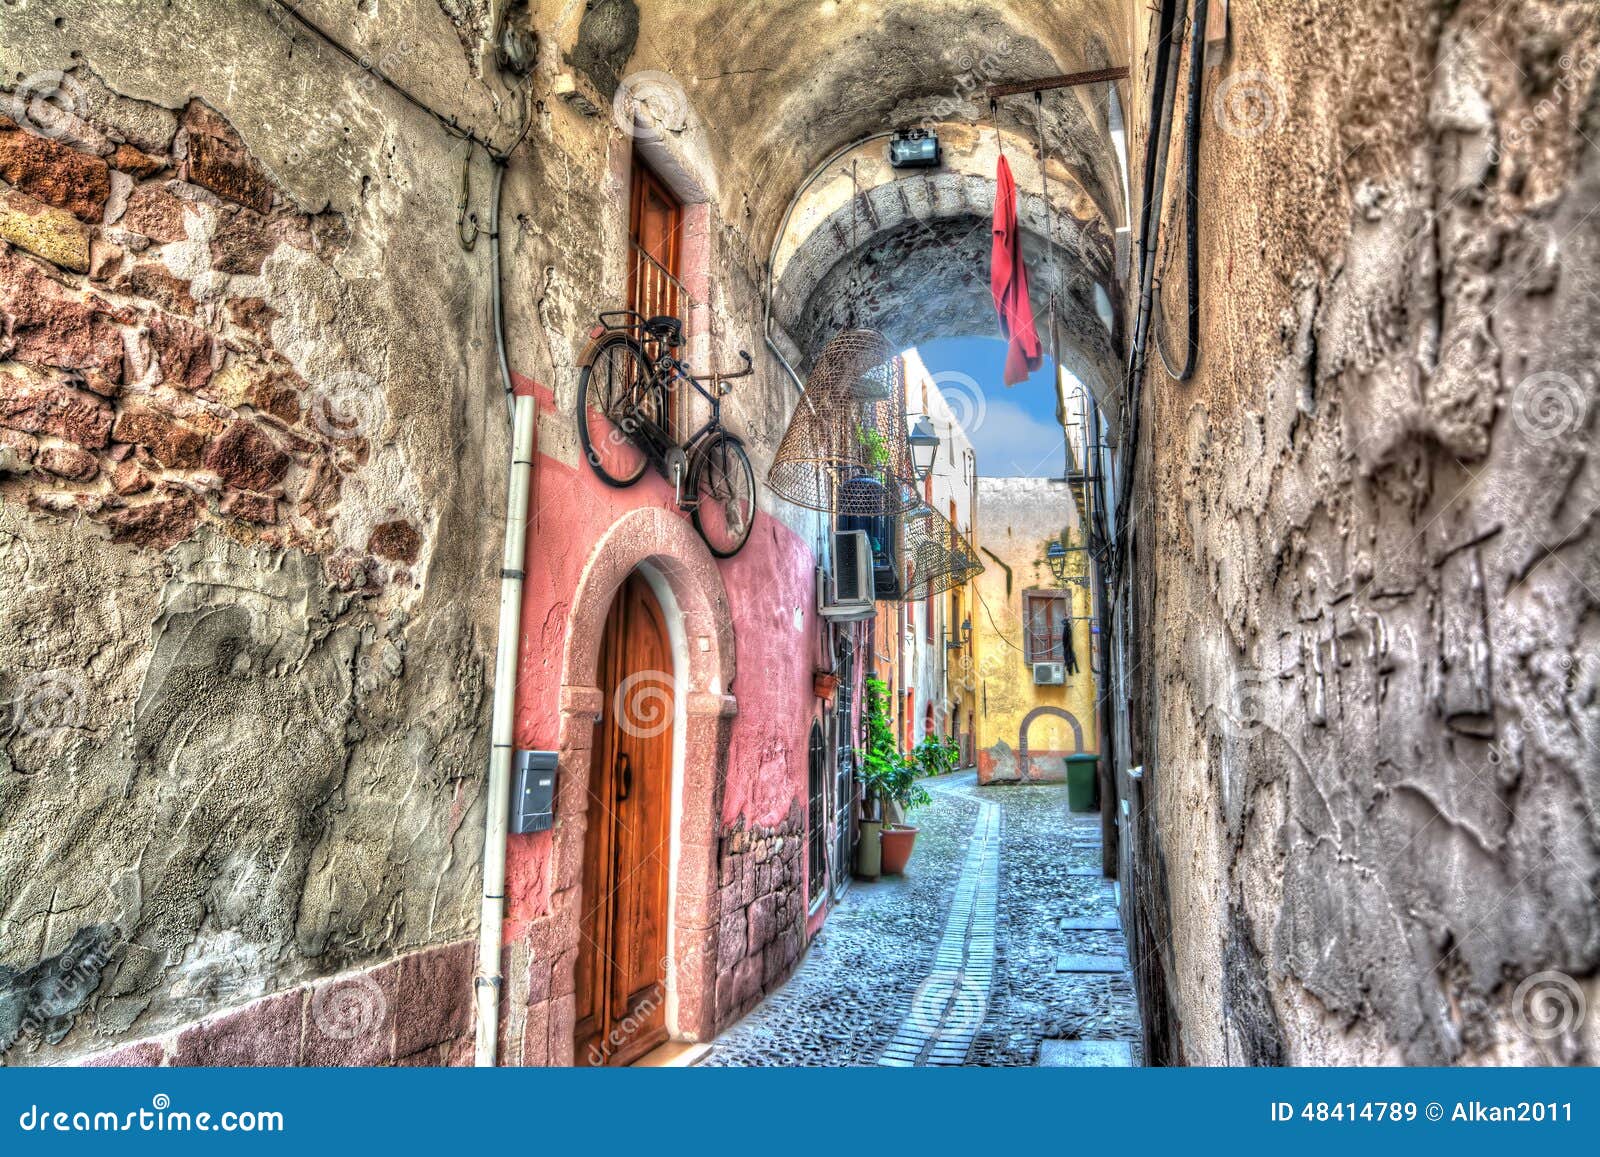 Bosa Backstreet In Hdr Tone Mapping  Stock Image Image of 